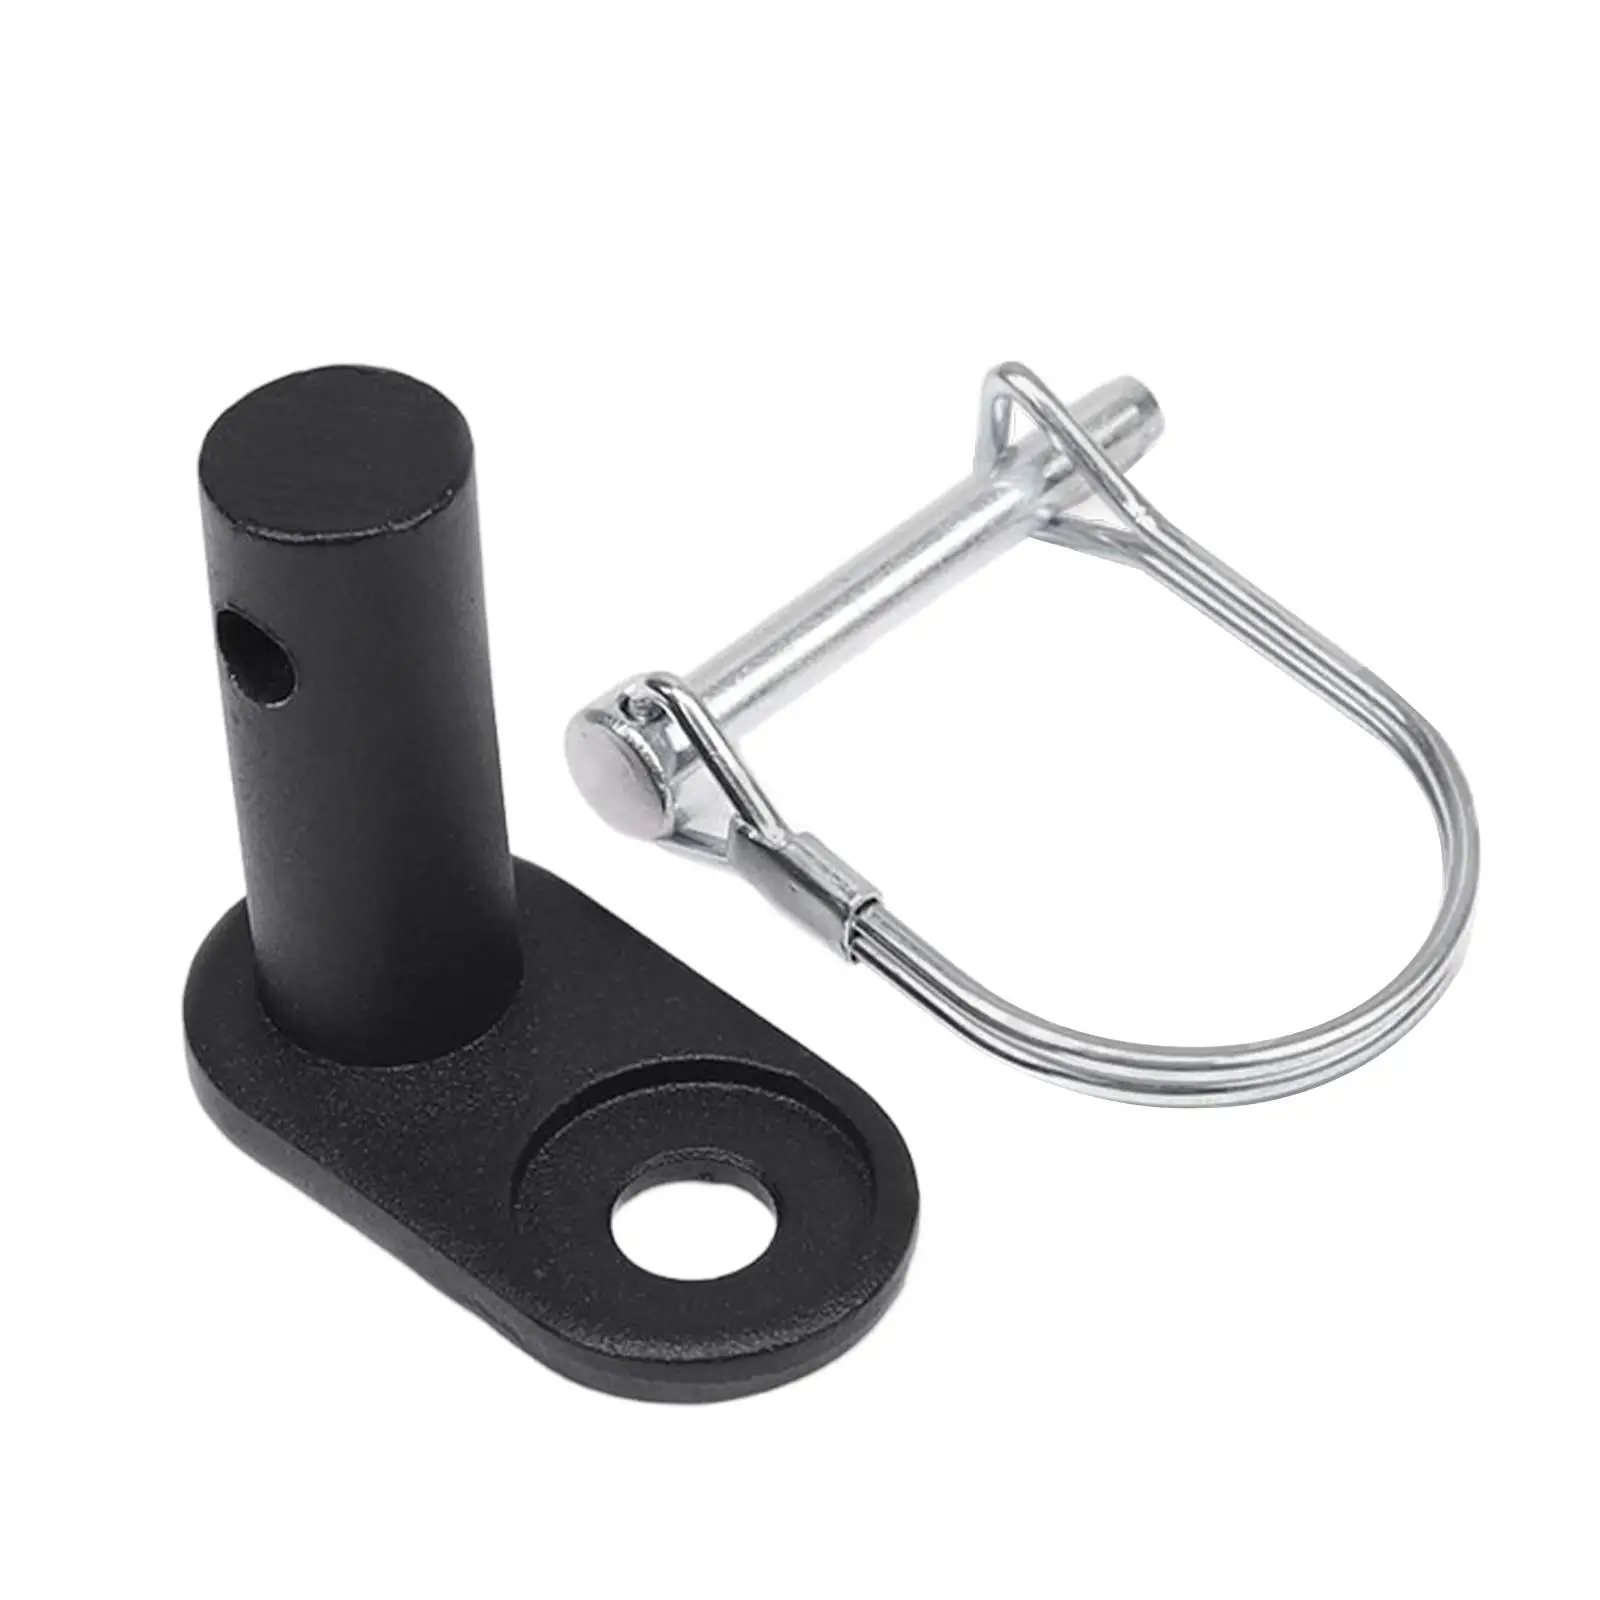 Bike Trailer Hitch Connector Carbon Steel Bicycle Trailer Coupler for Children, Pet, Cargo Trailers